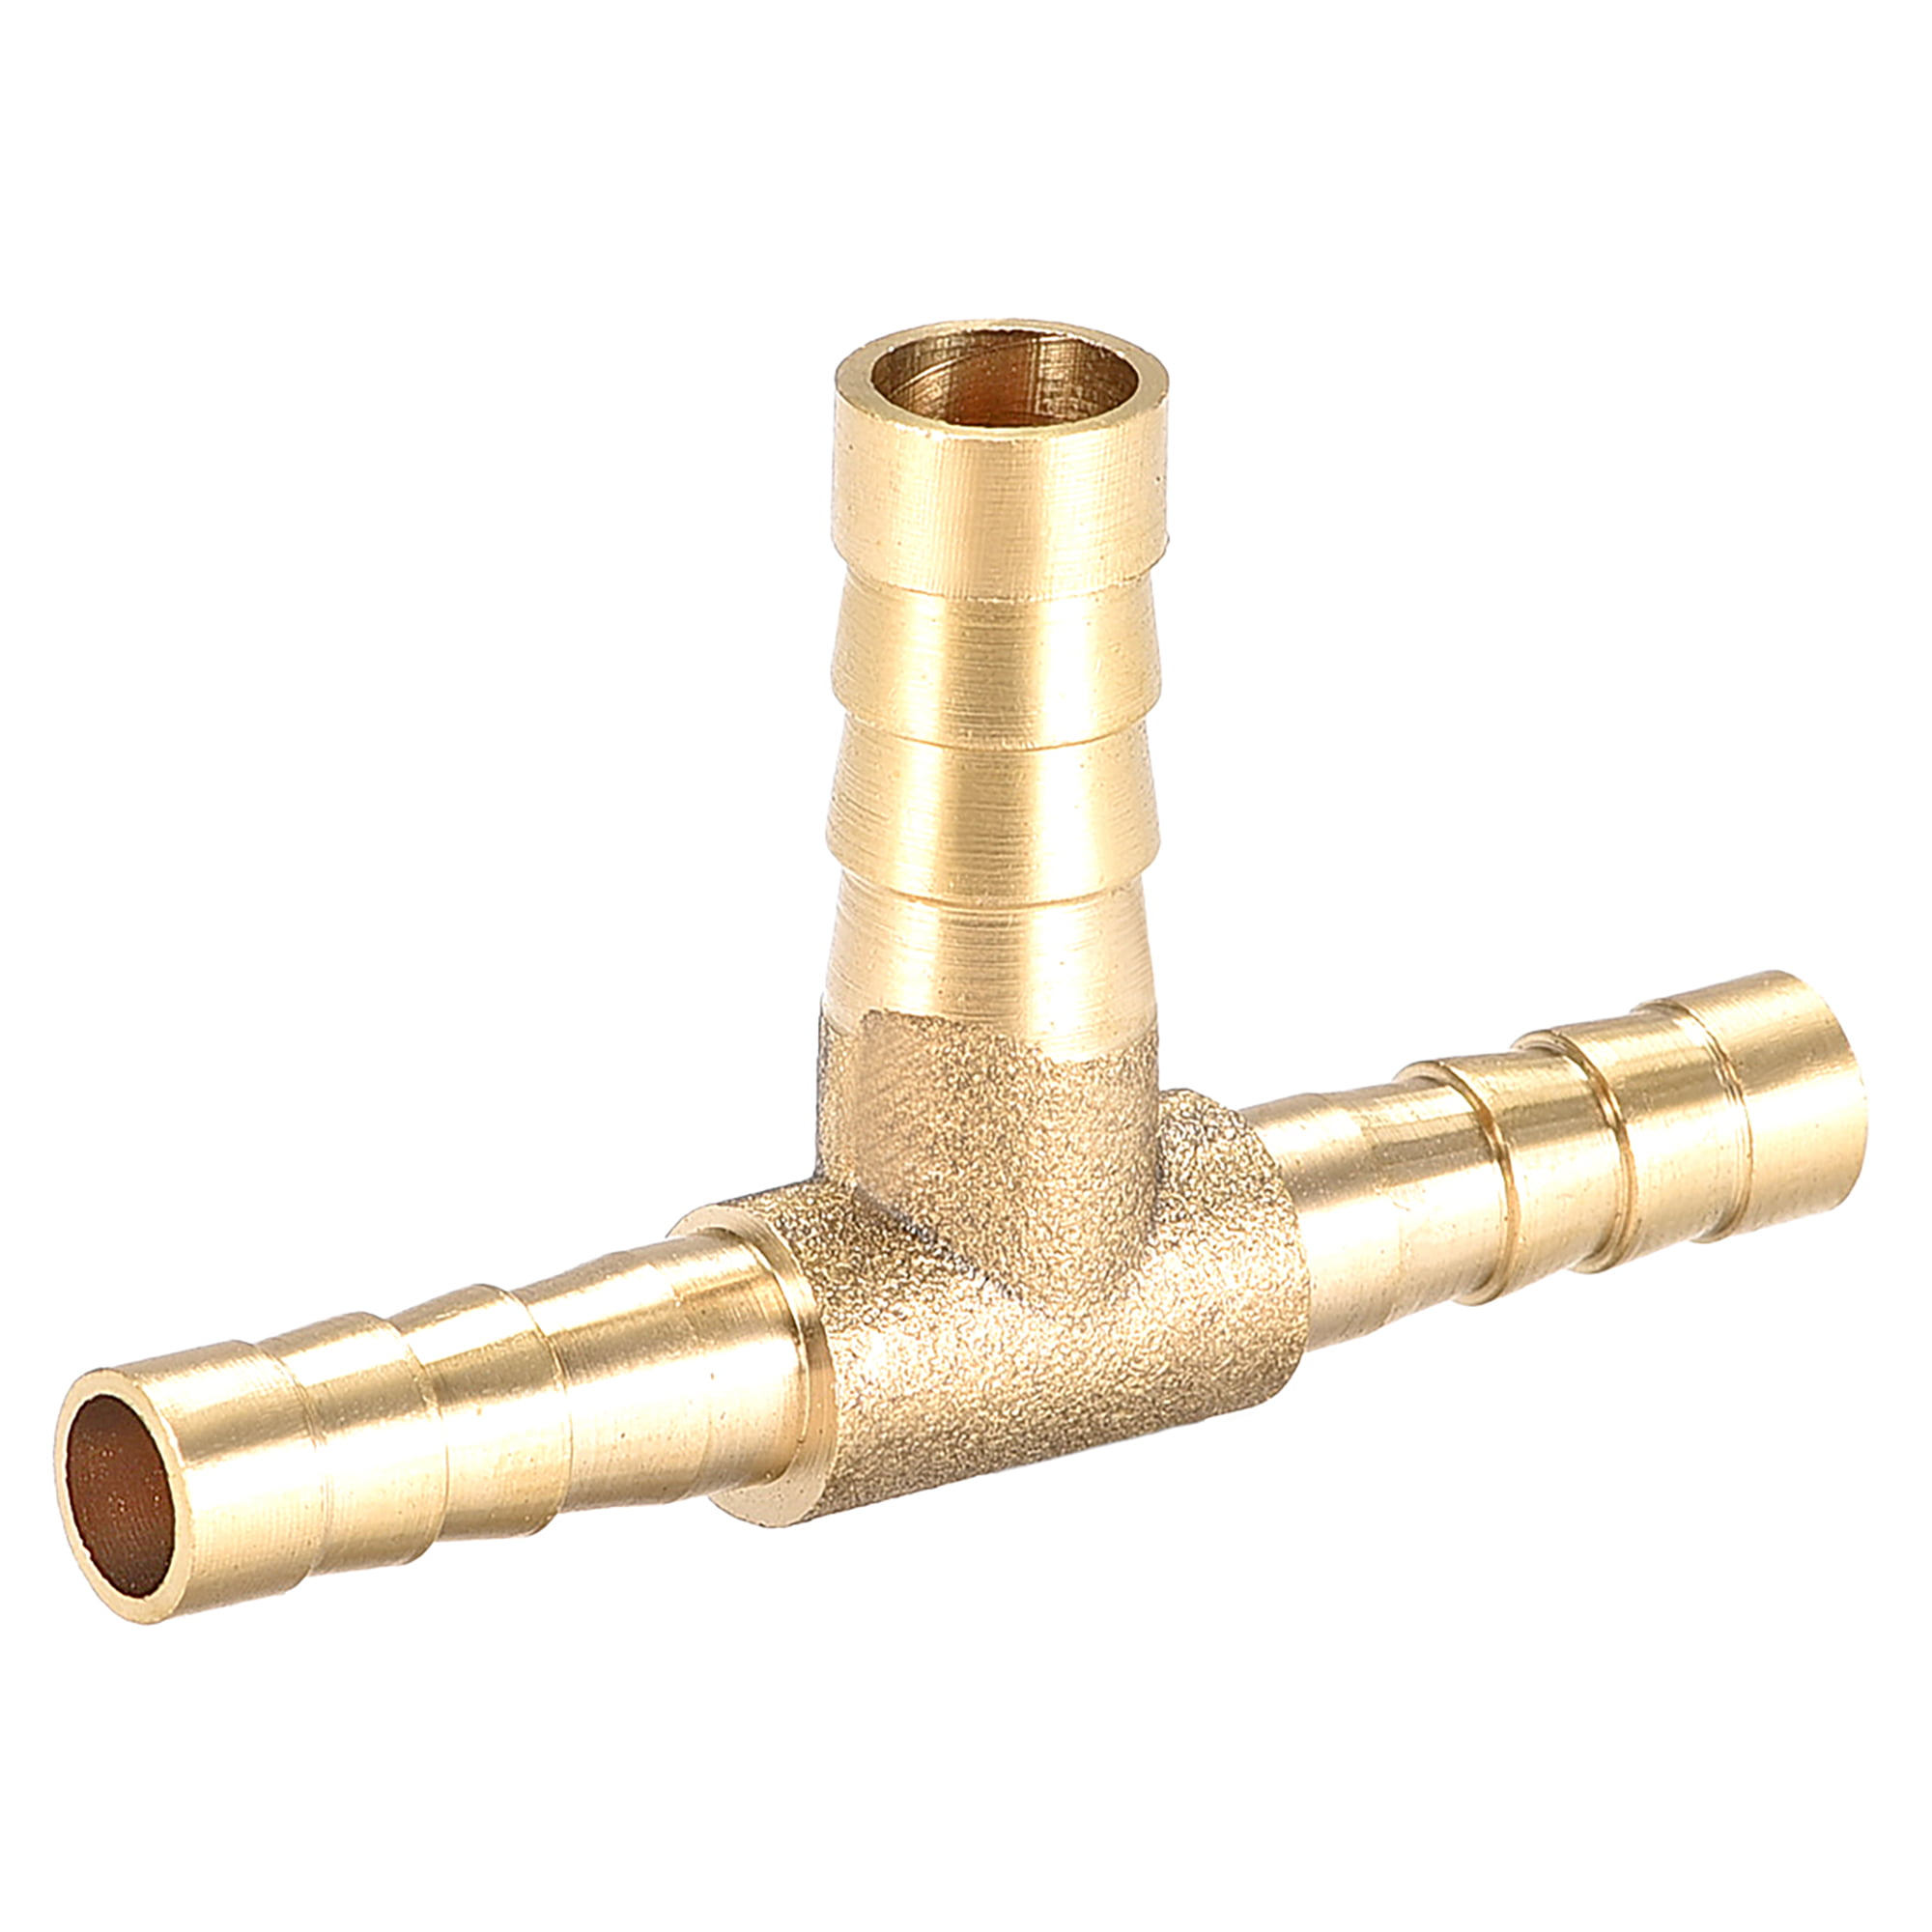 Brass TEE 3 way Hose Joiner Barbed Connector Air Fuel Water Pipe Tubing T 